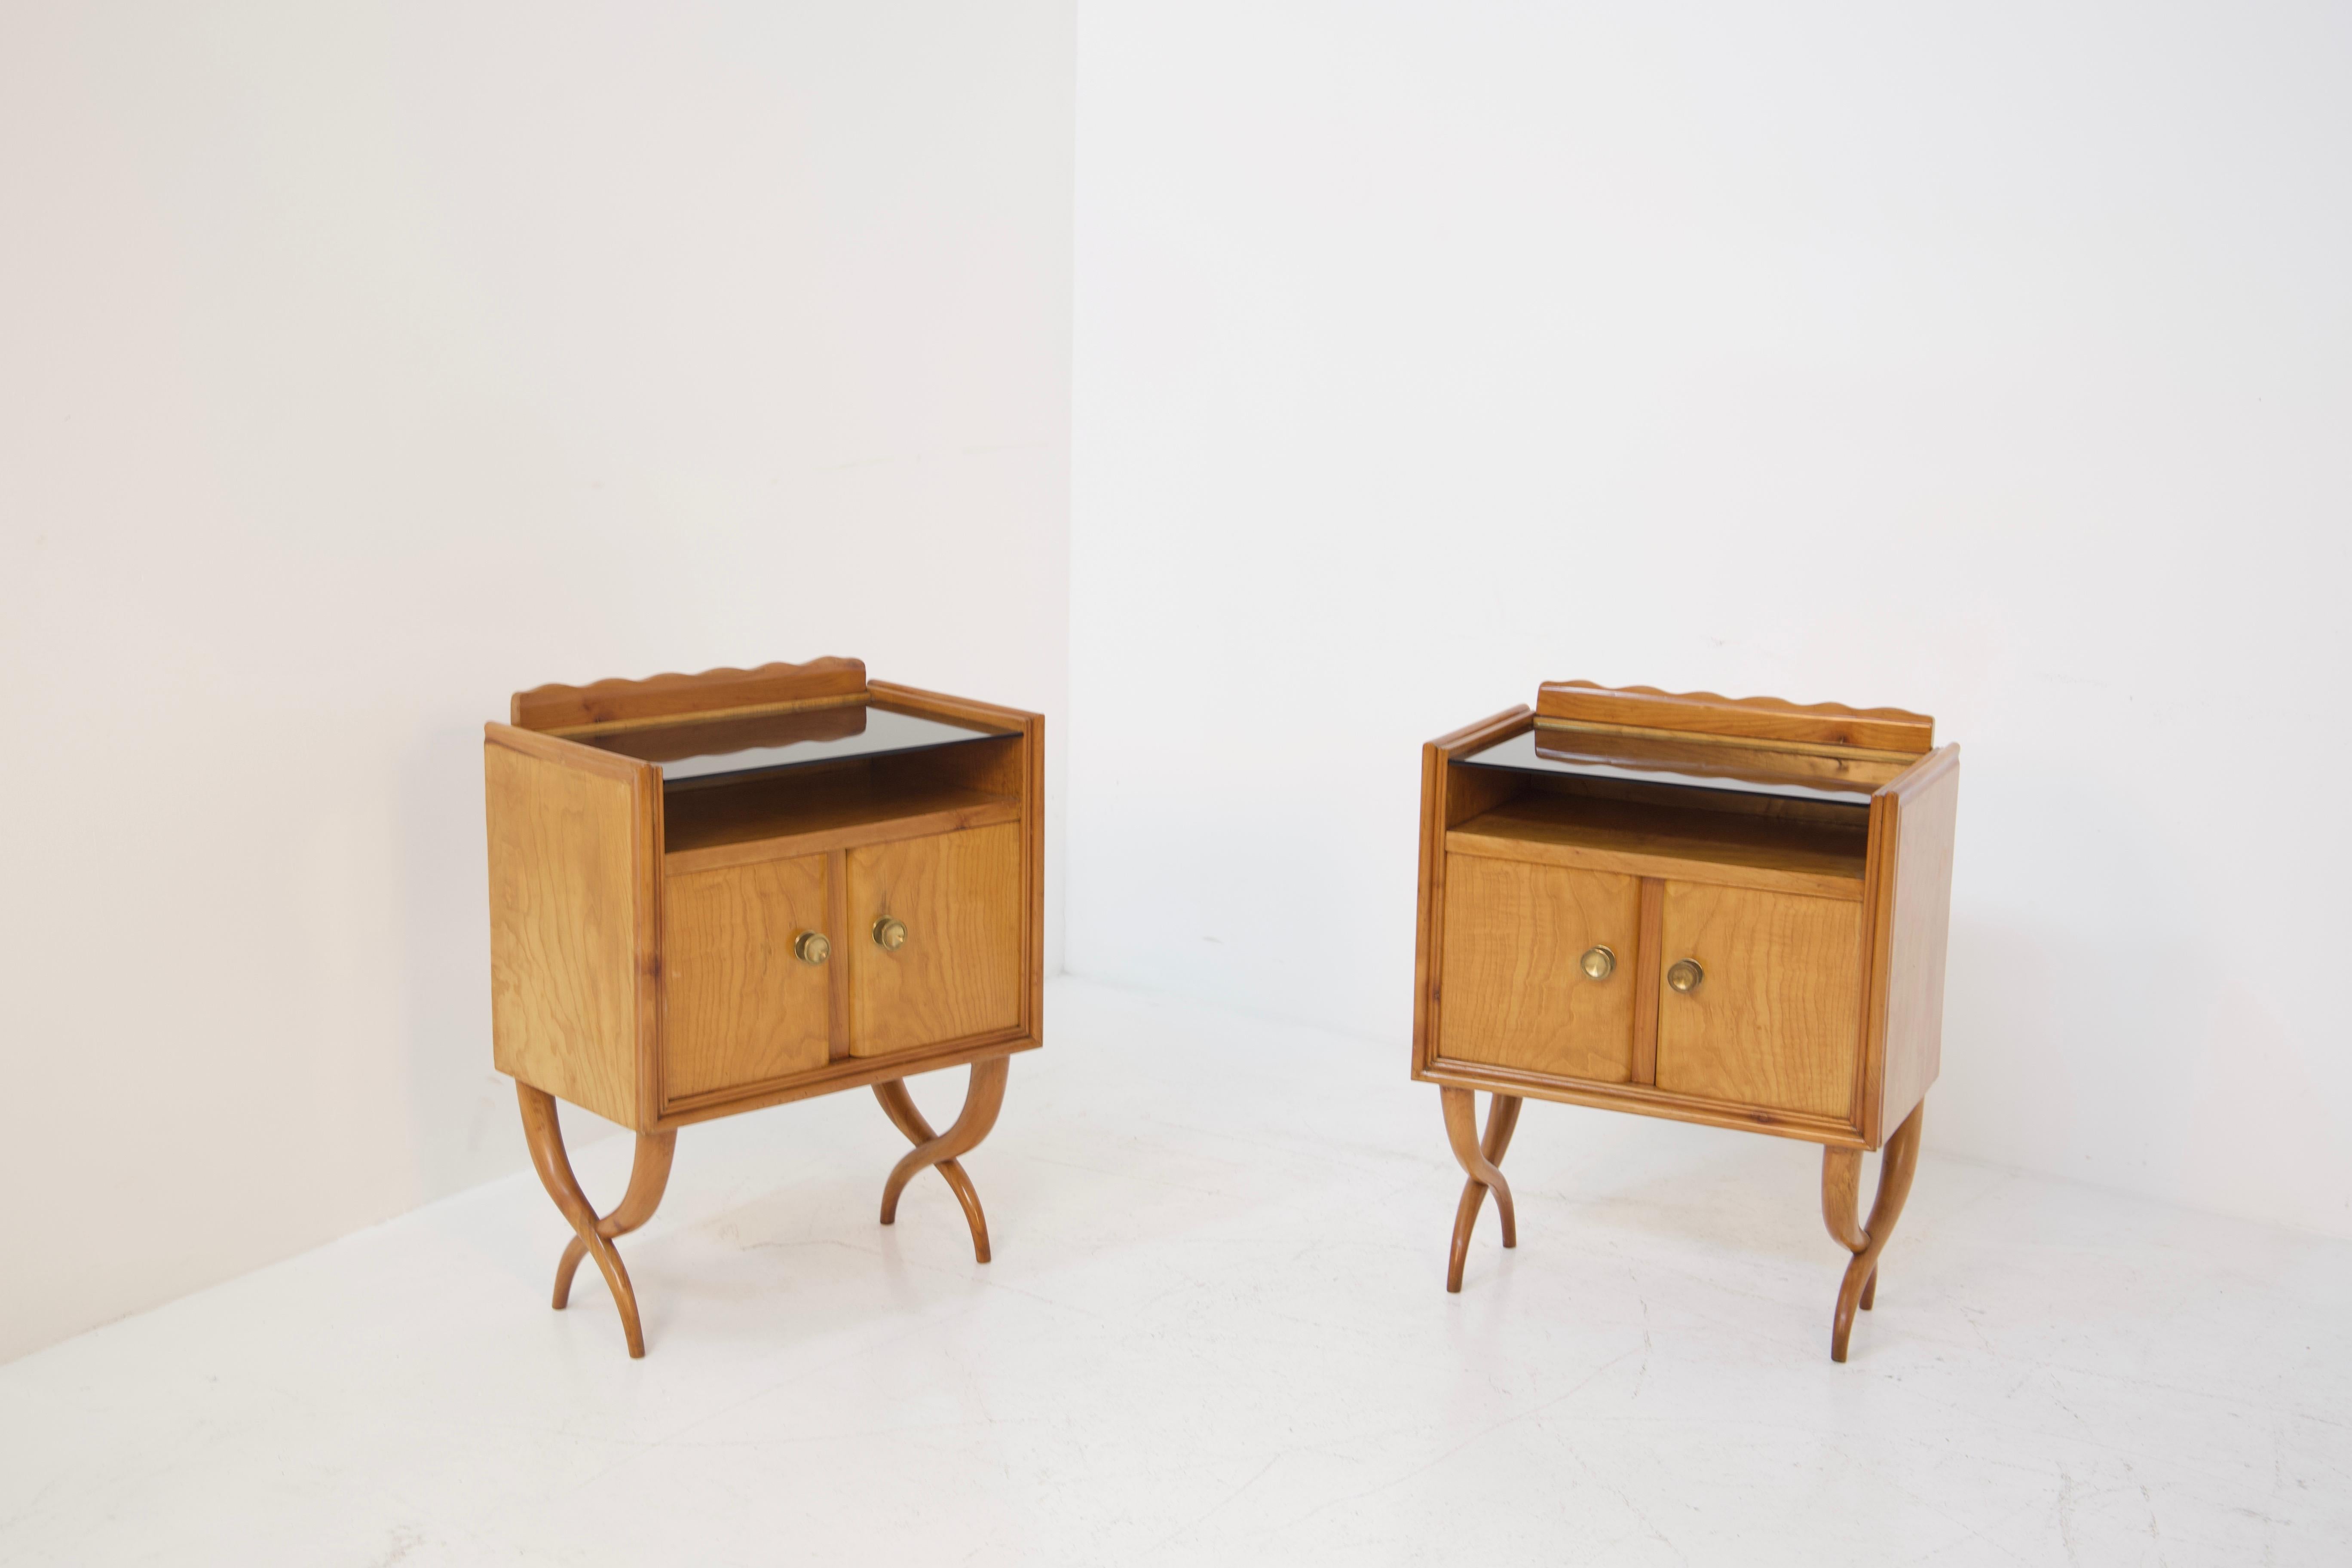 Elegant pair of nightstands by Paolo Buffa in wood glass and brass from the 1950s. Paolo Buffa nightstands are made of beechwood. Its special feature is its cornucopias at the base as feet. The nightstands are double door and openable with two well